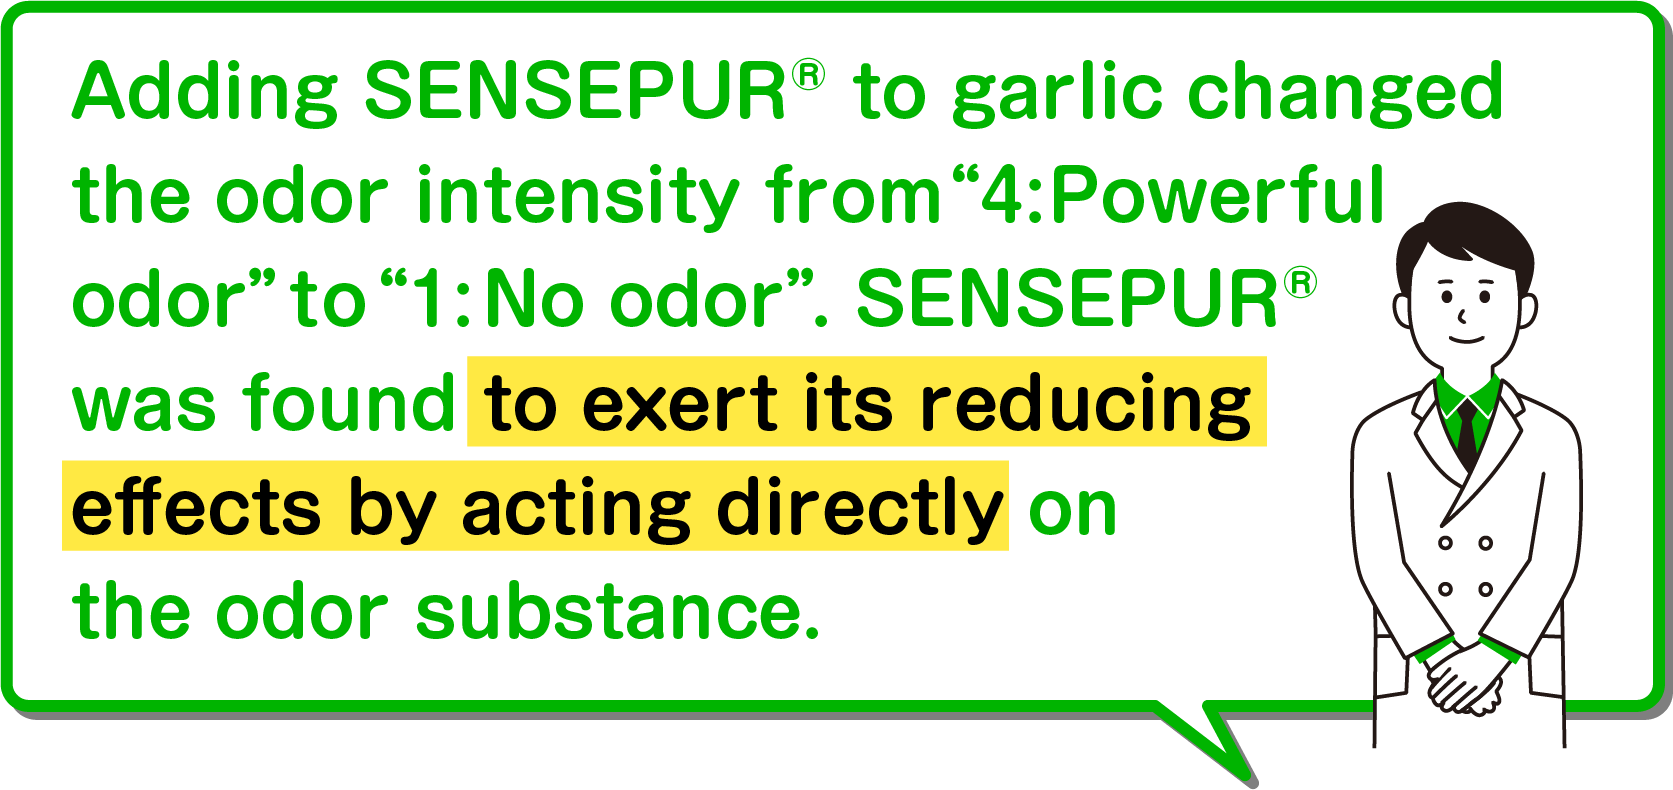 Adding SENSEPUR® to garlic changed the odor intensity from “4: Powerful odor” to “1: No odor”. SENSEPUR® was found to exert its reducing effects by acting directly on the odor substance.